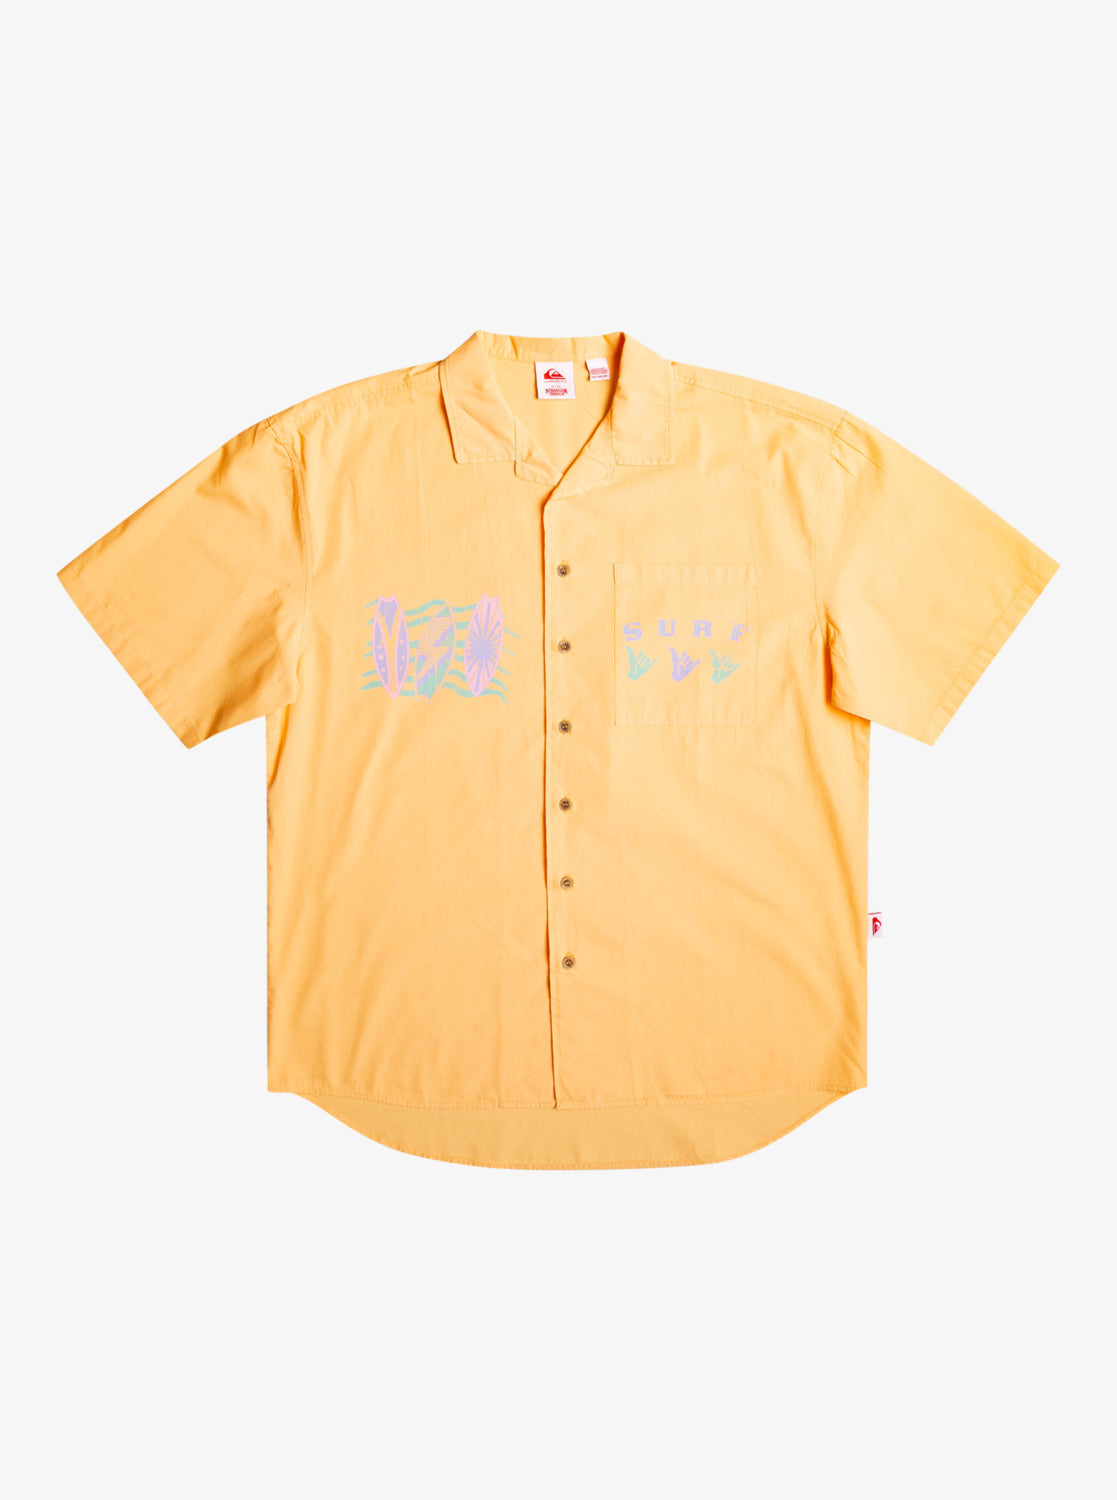 Quiksilver x Stranger Things The Mike Short Sleeve Shirt